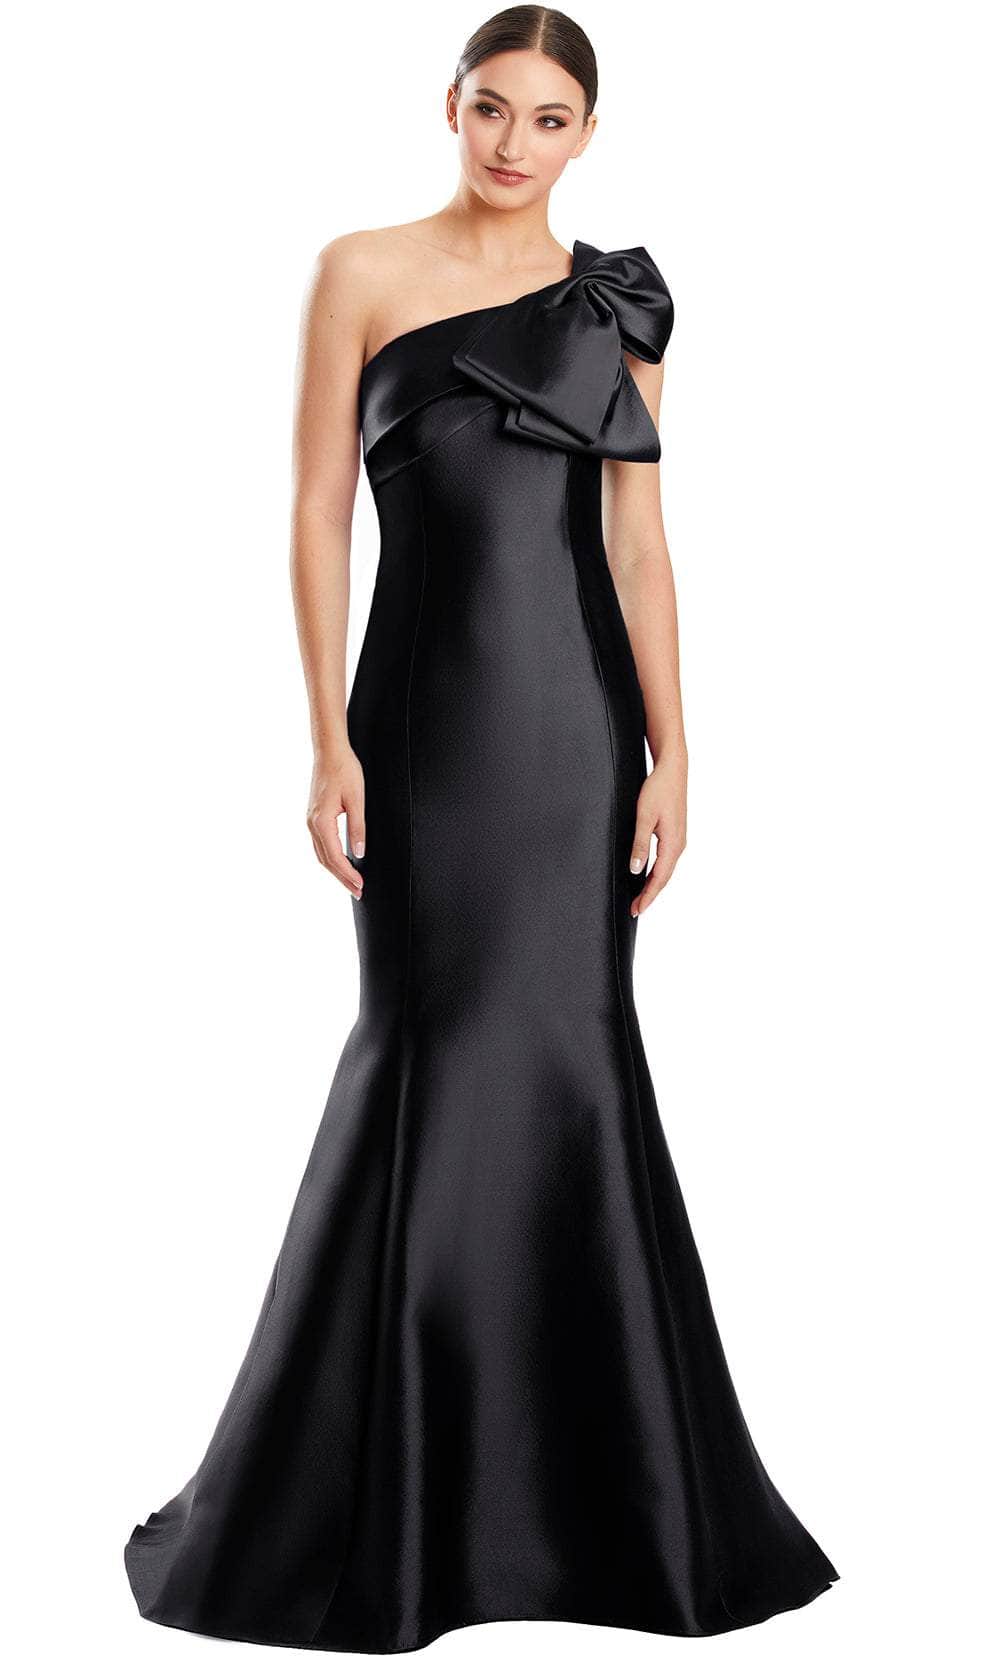 Alexander by Daymor 1850F23 - Bow Accent Asymmetric Evening Gown 00 / Black